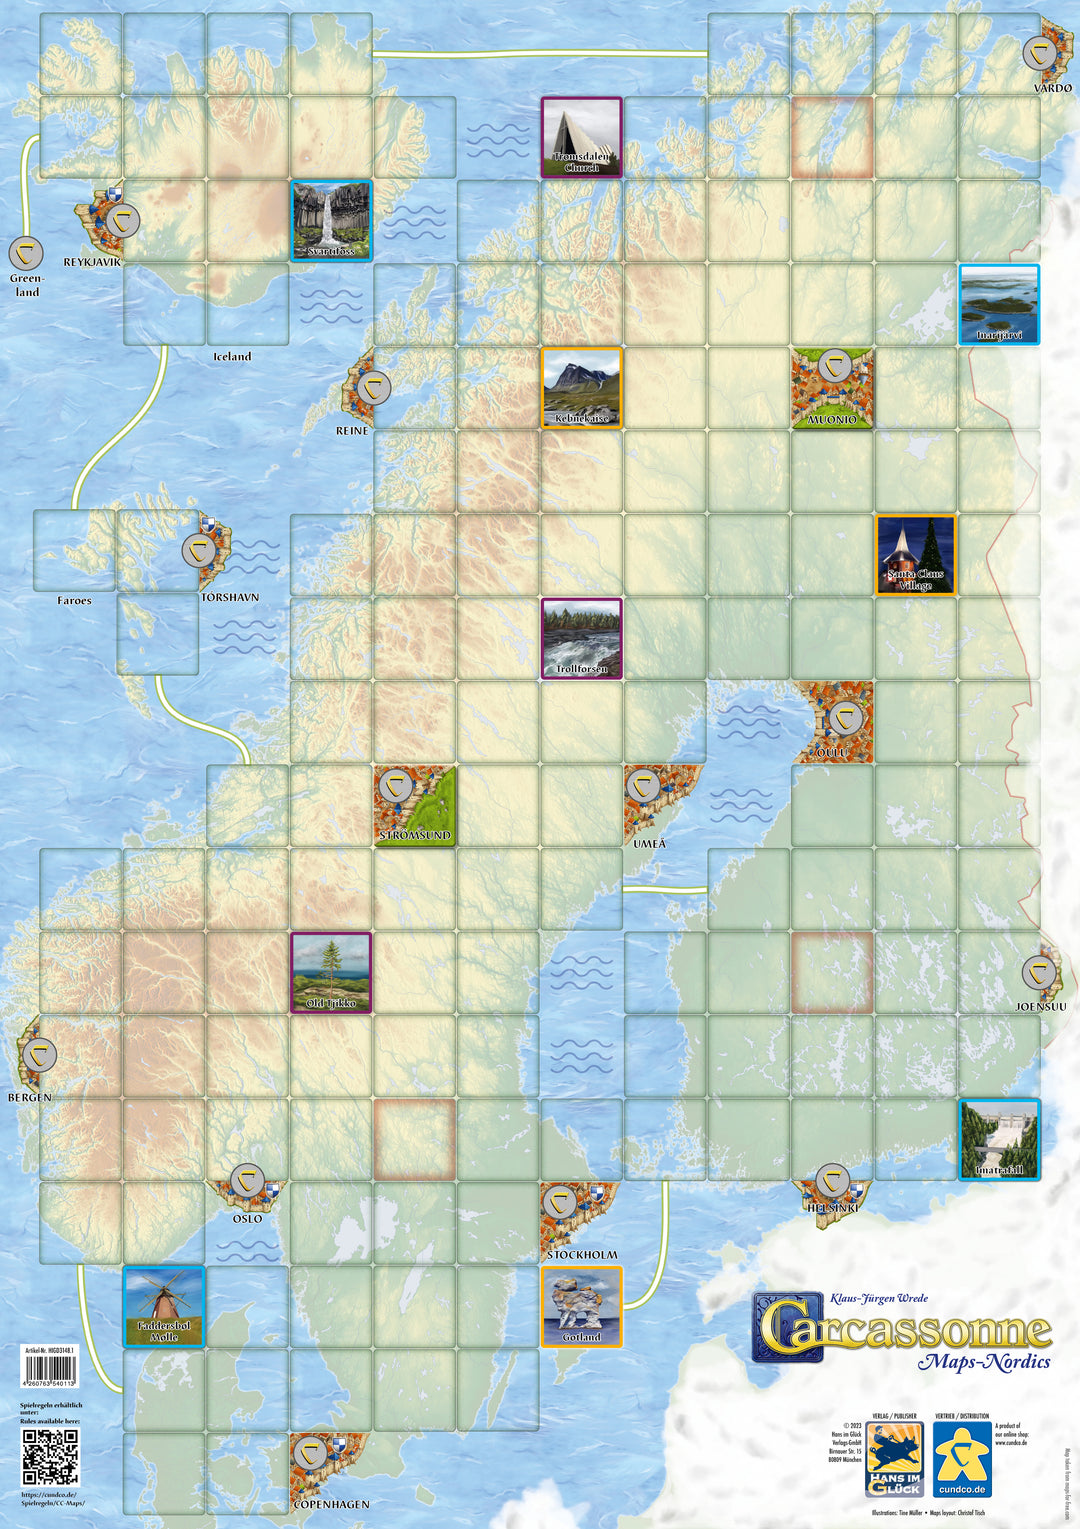 An image displaying the Carcassonne map of Scandinavia: an geographically accurate map of Sweden, Norway, and Finland overlaid with a grid sized for Carcassonne tiles.